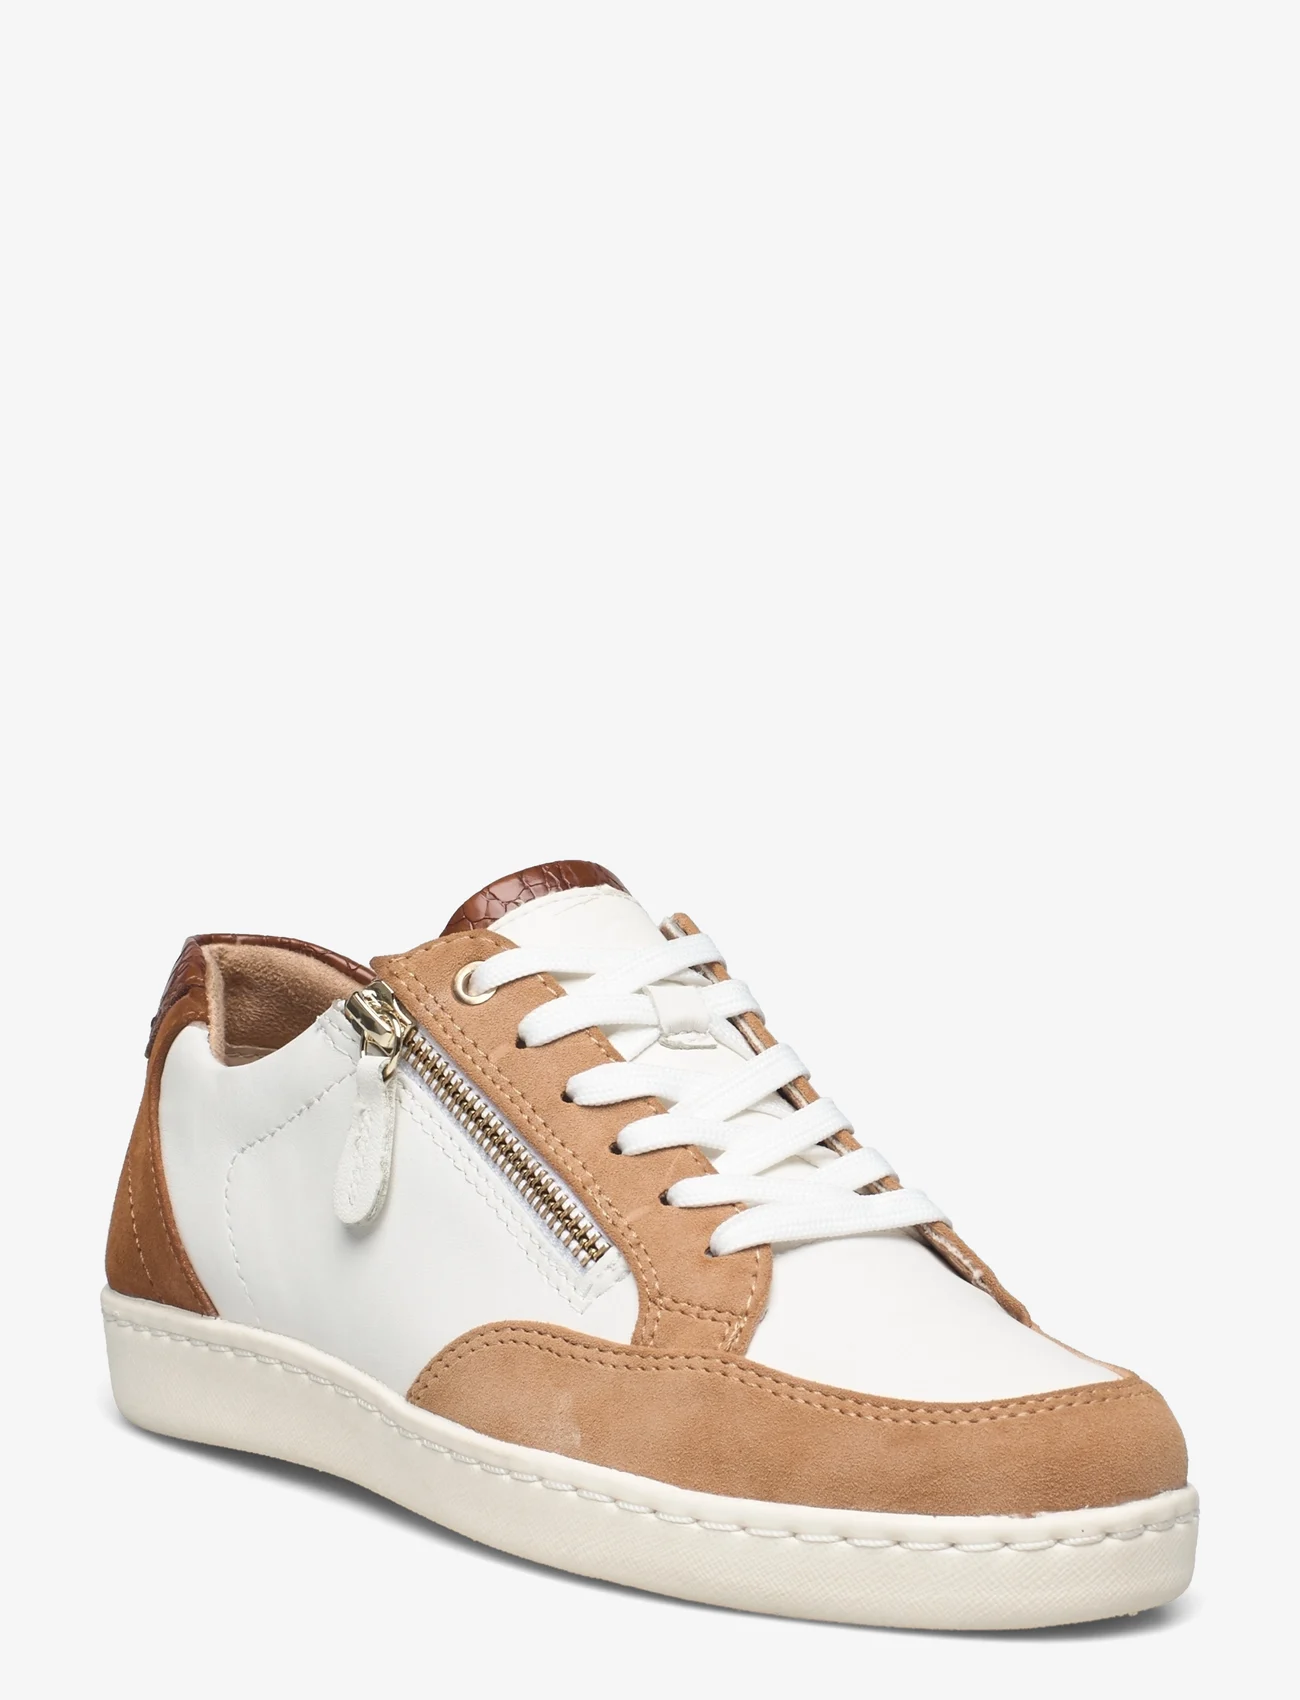 Tamaris - Woms Lace-up - low top sneakers - wht/almond com - 0